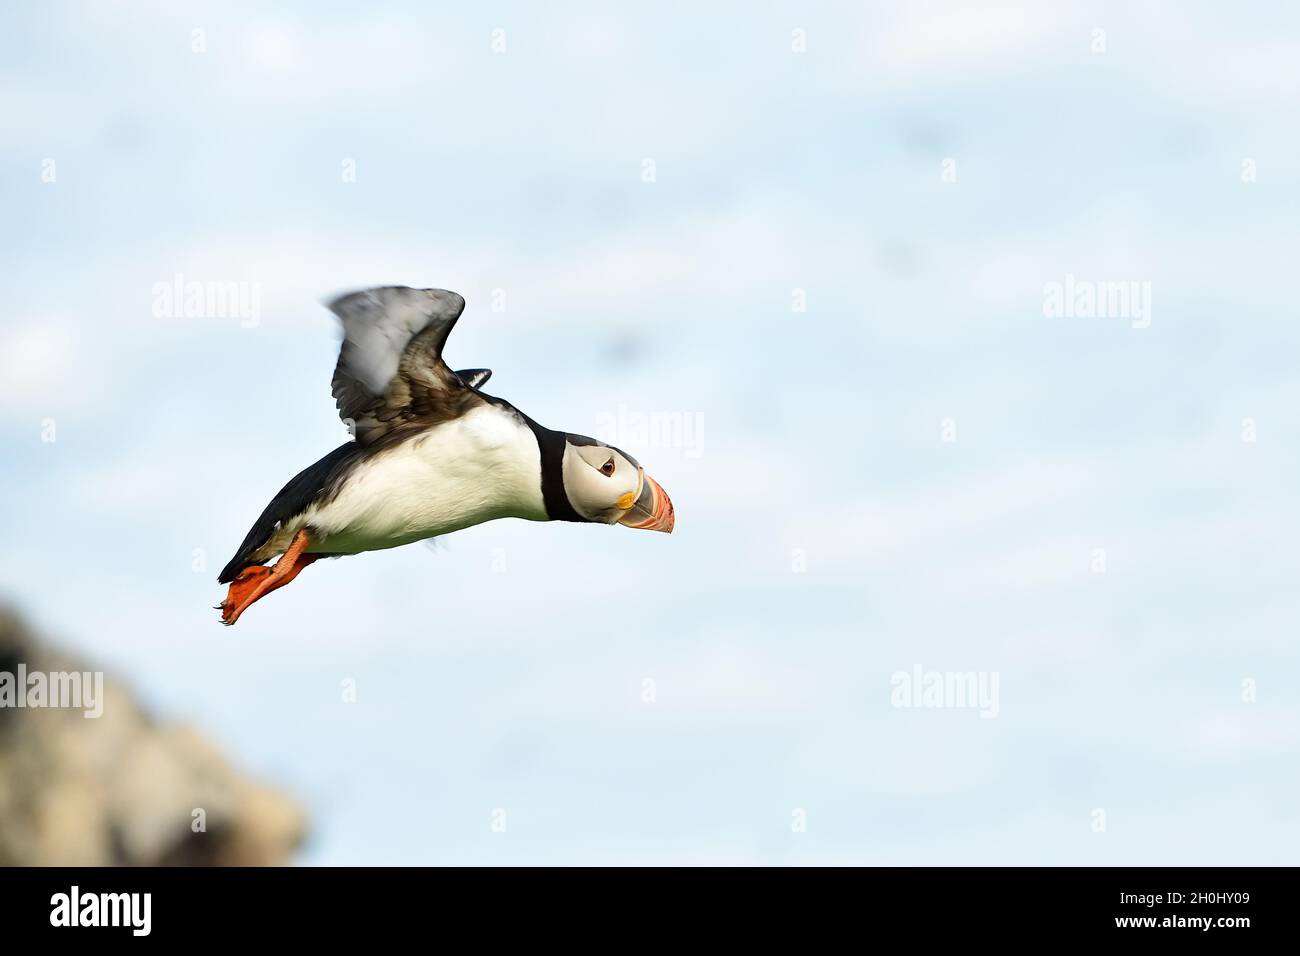 Puffin in flight. Puffin takeoff. Stock Photo